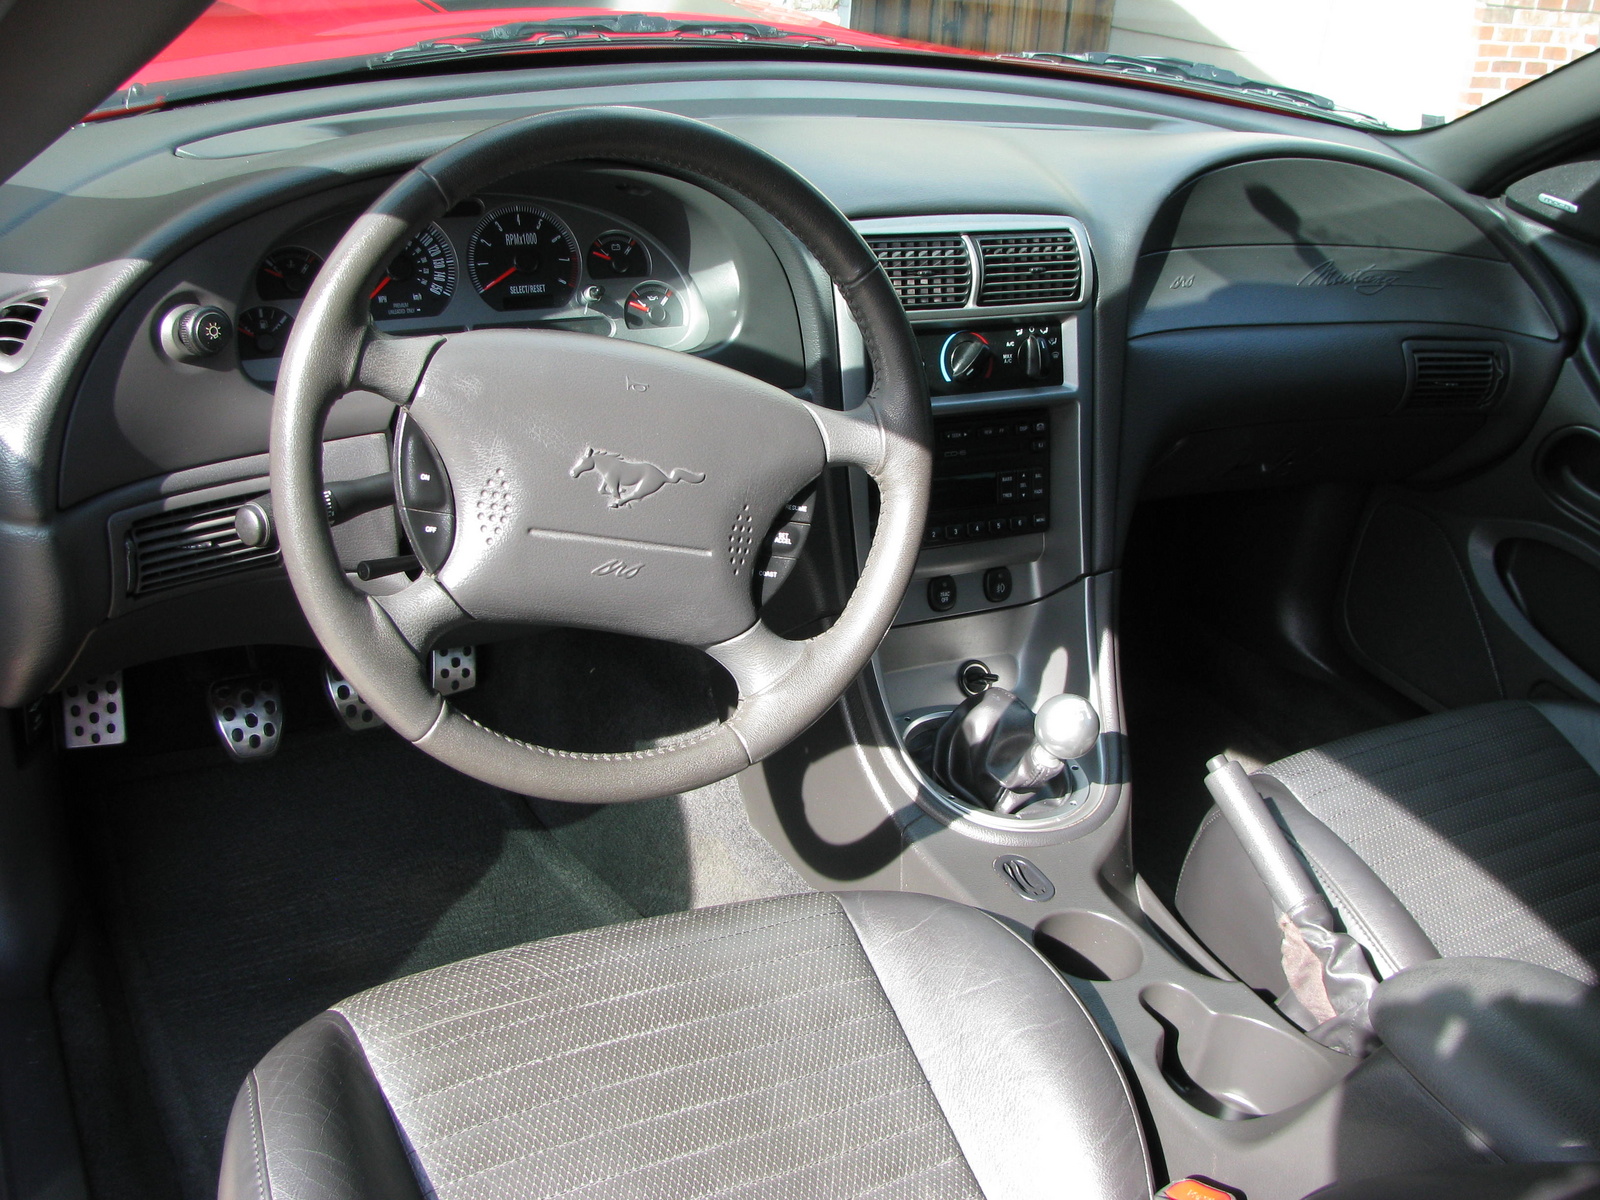 2003 Ford mustang interior trim #6